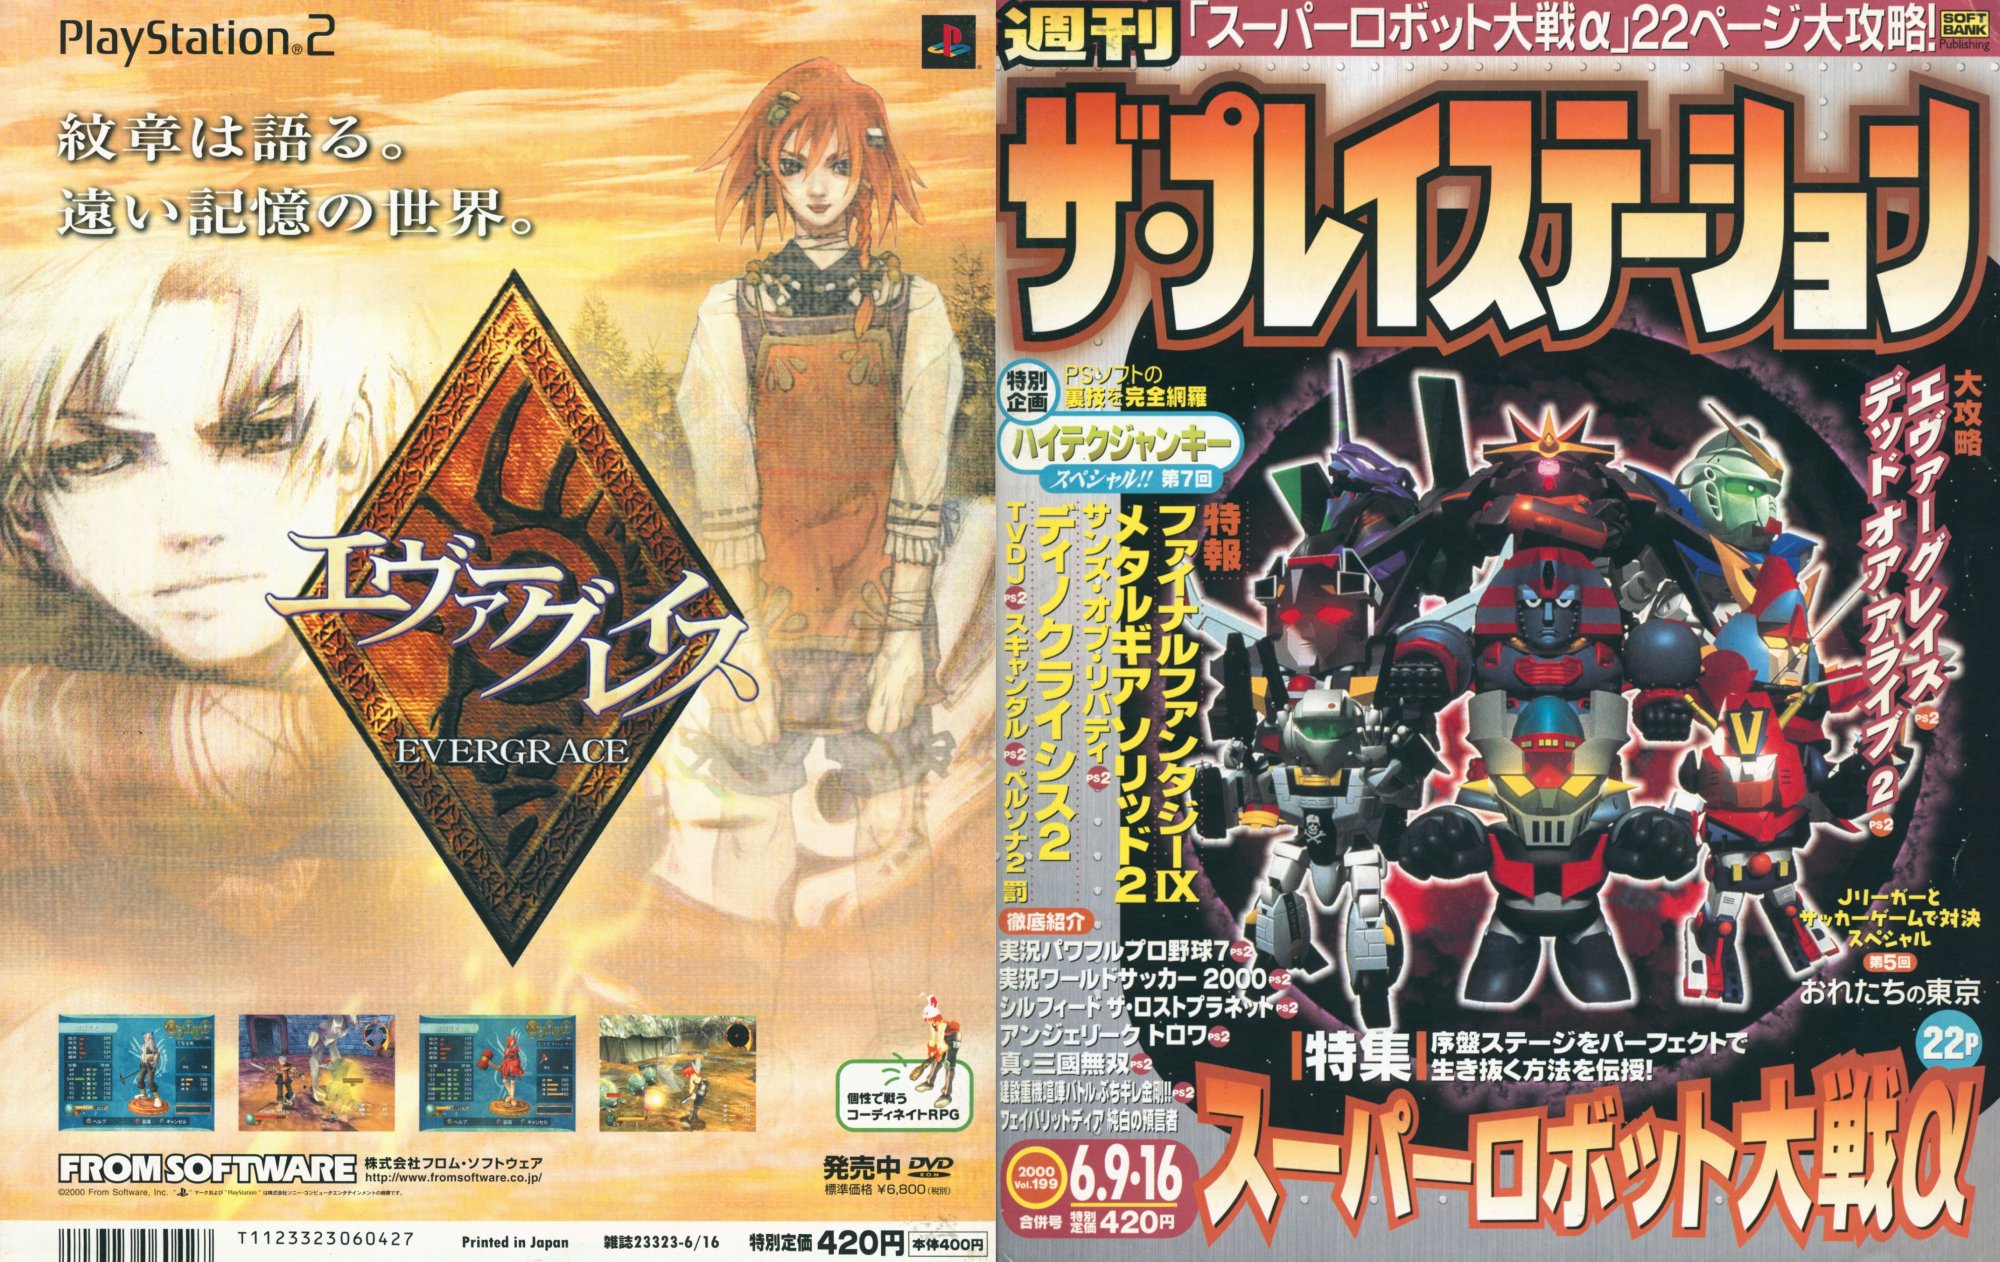 front and back cover scans of the playstation vol 199 magazine. the front cover has 3d cg renders of small mechs, from a game called Super Robot Wars Alpha. the back cover is an advertisement for evergrace, featuring the two protagonists and the game's logo along with game screenshots.